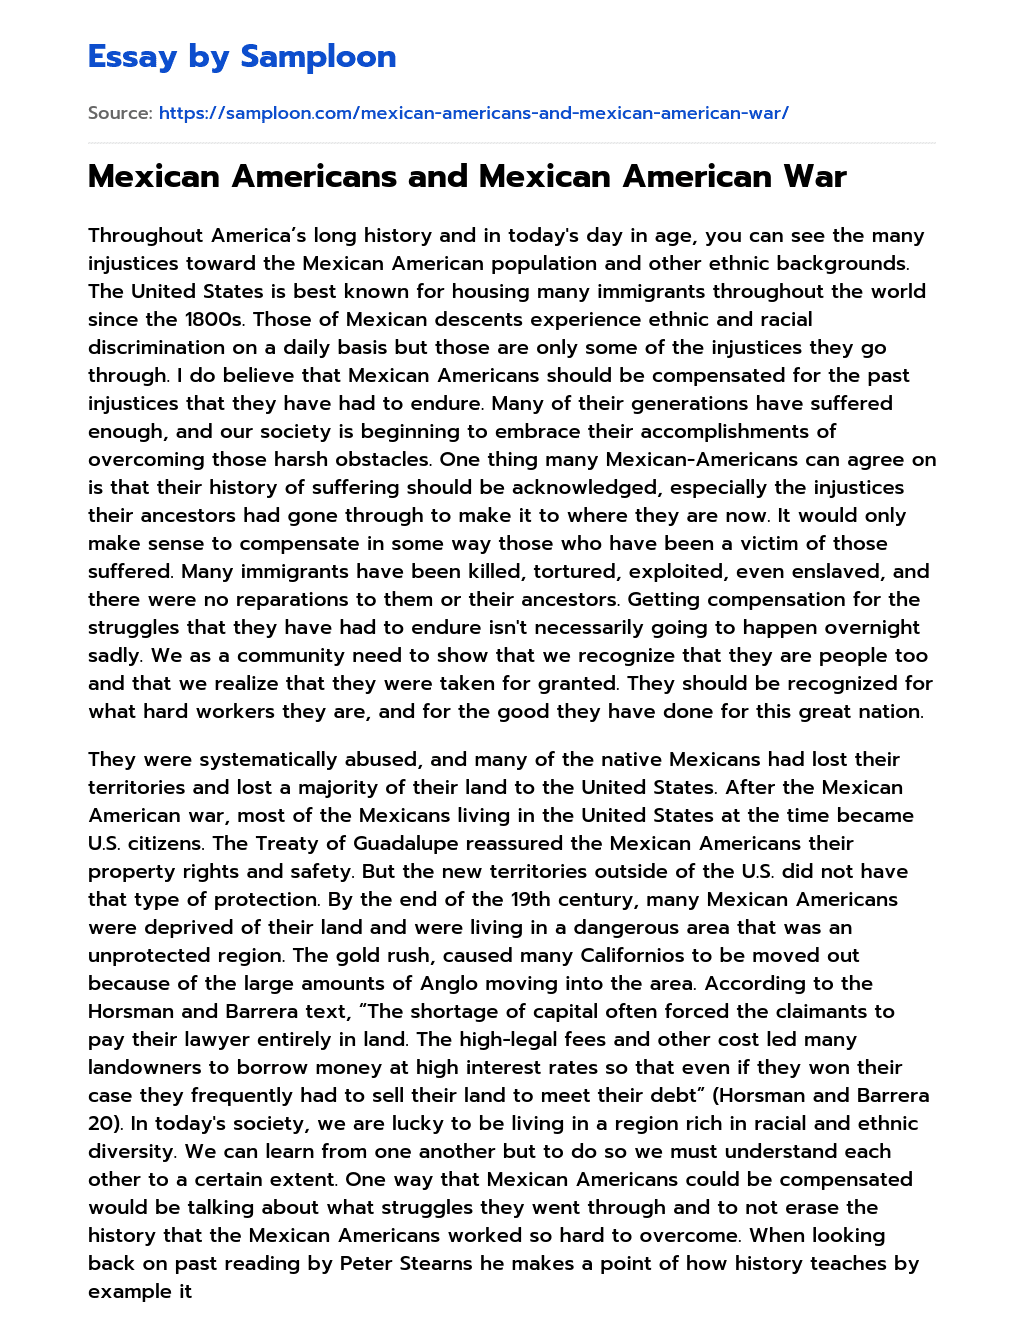 Mexican Americans and Mexican American War essay